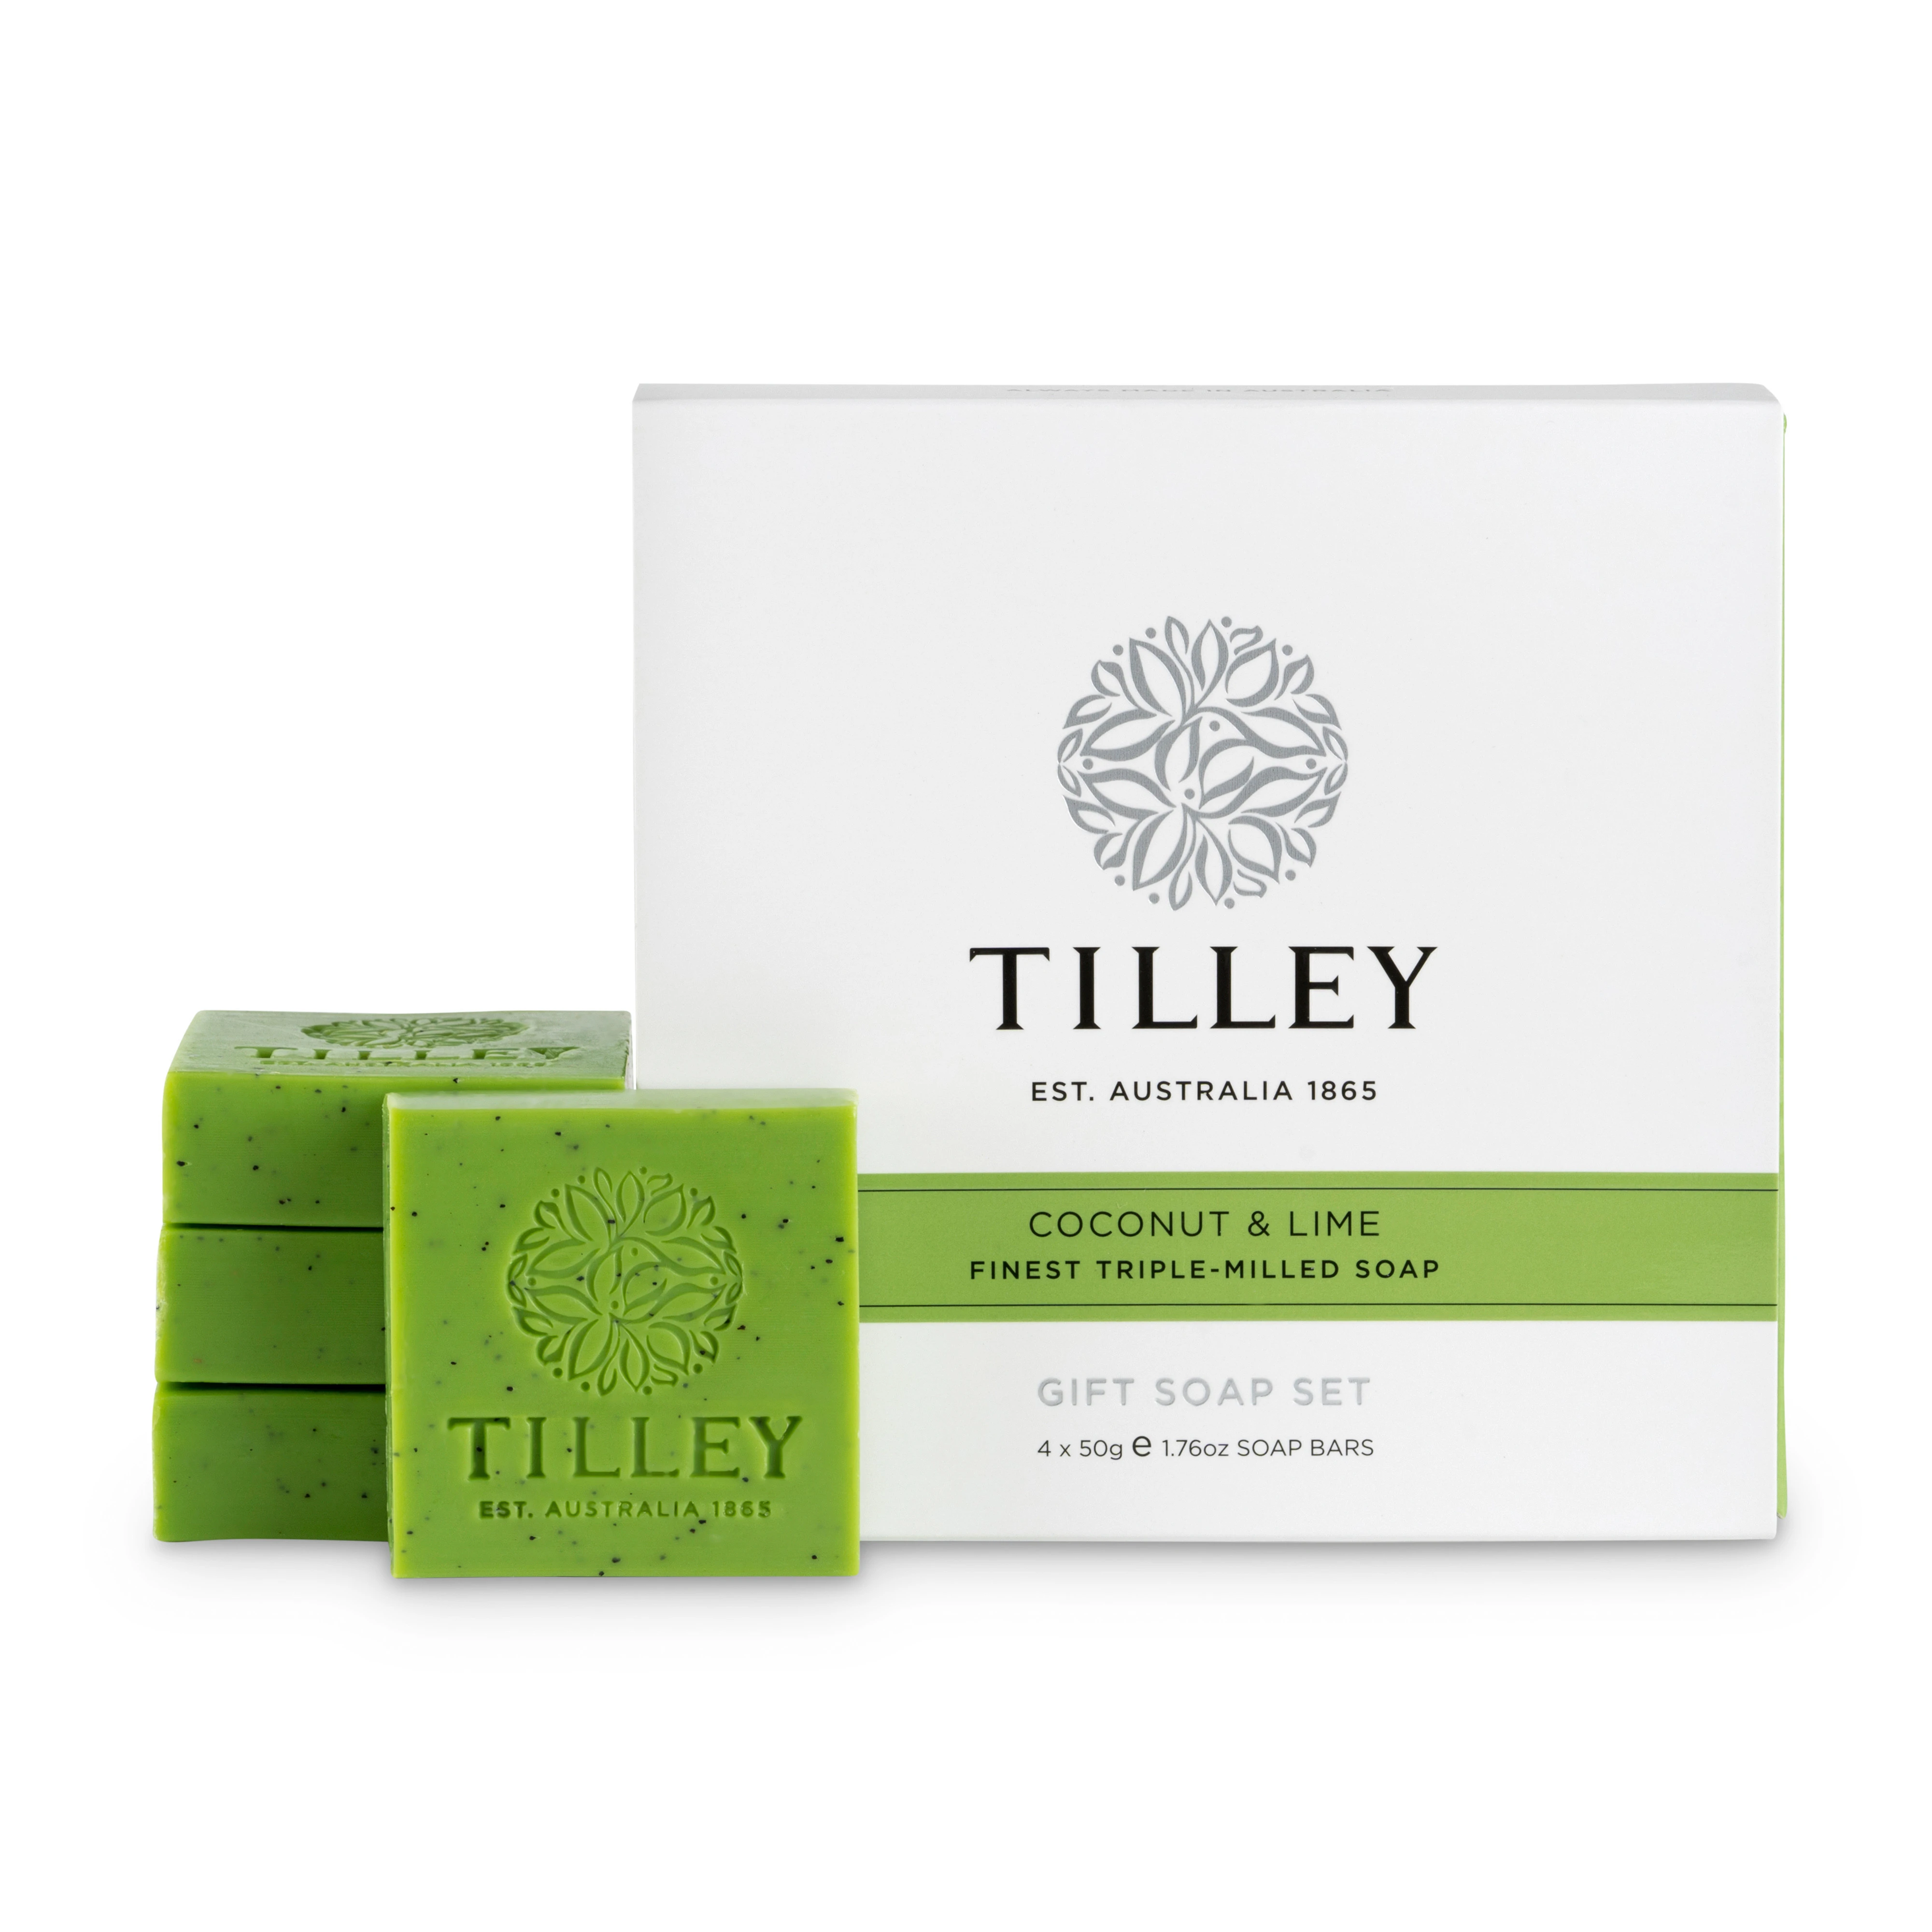 TILLEY - Gift Soap Sets - 4 x 50g - Classic White Collection - Bath &amp; Body